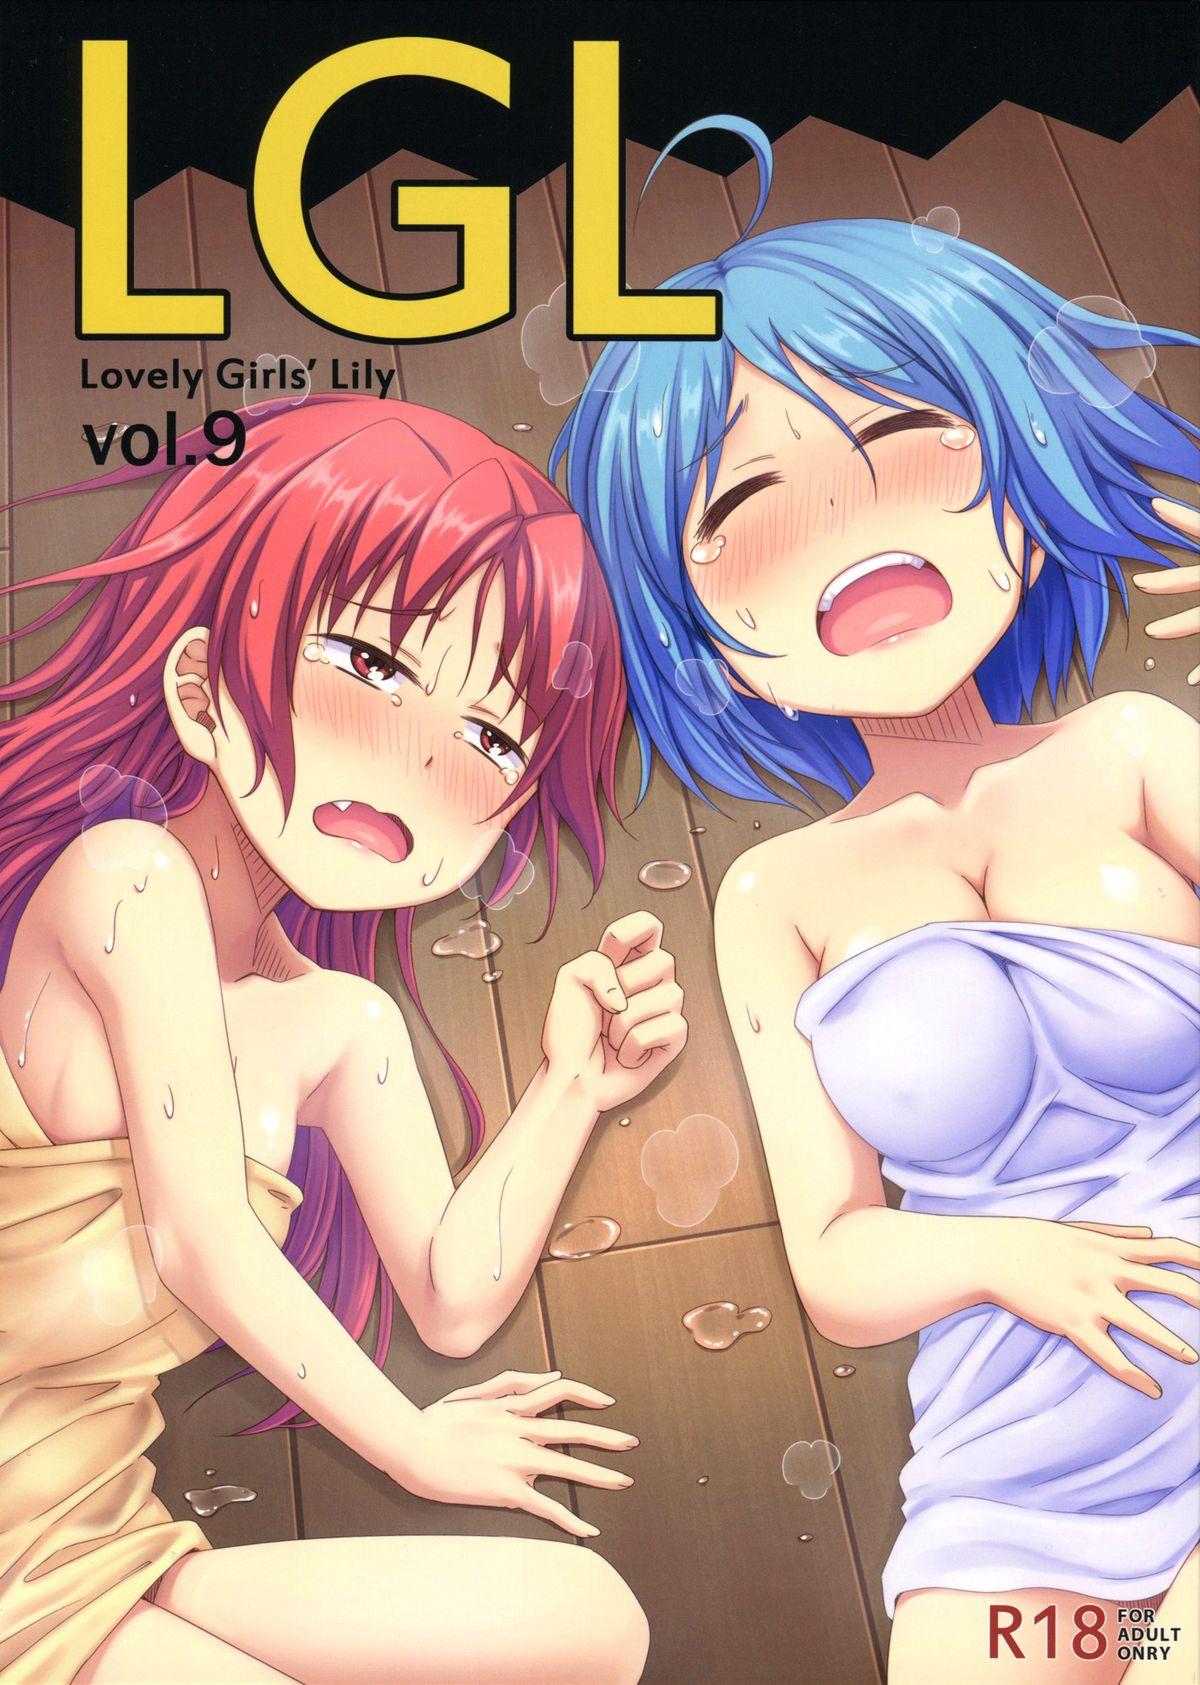 Office Sex Lovely Girls' Lily Vol. 9 - Puella magi madoka magica Oral Sex - Picture 1